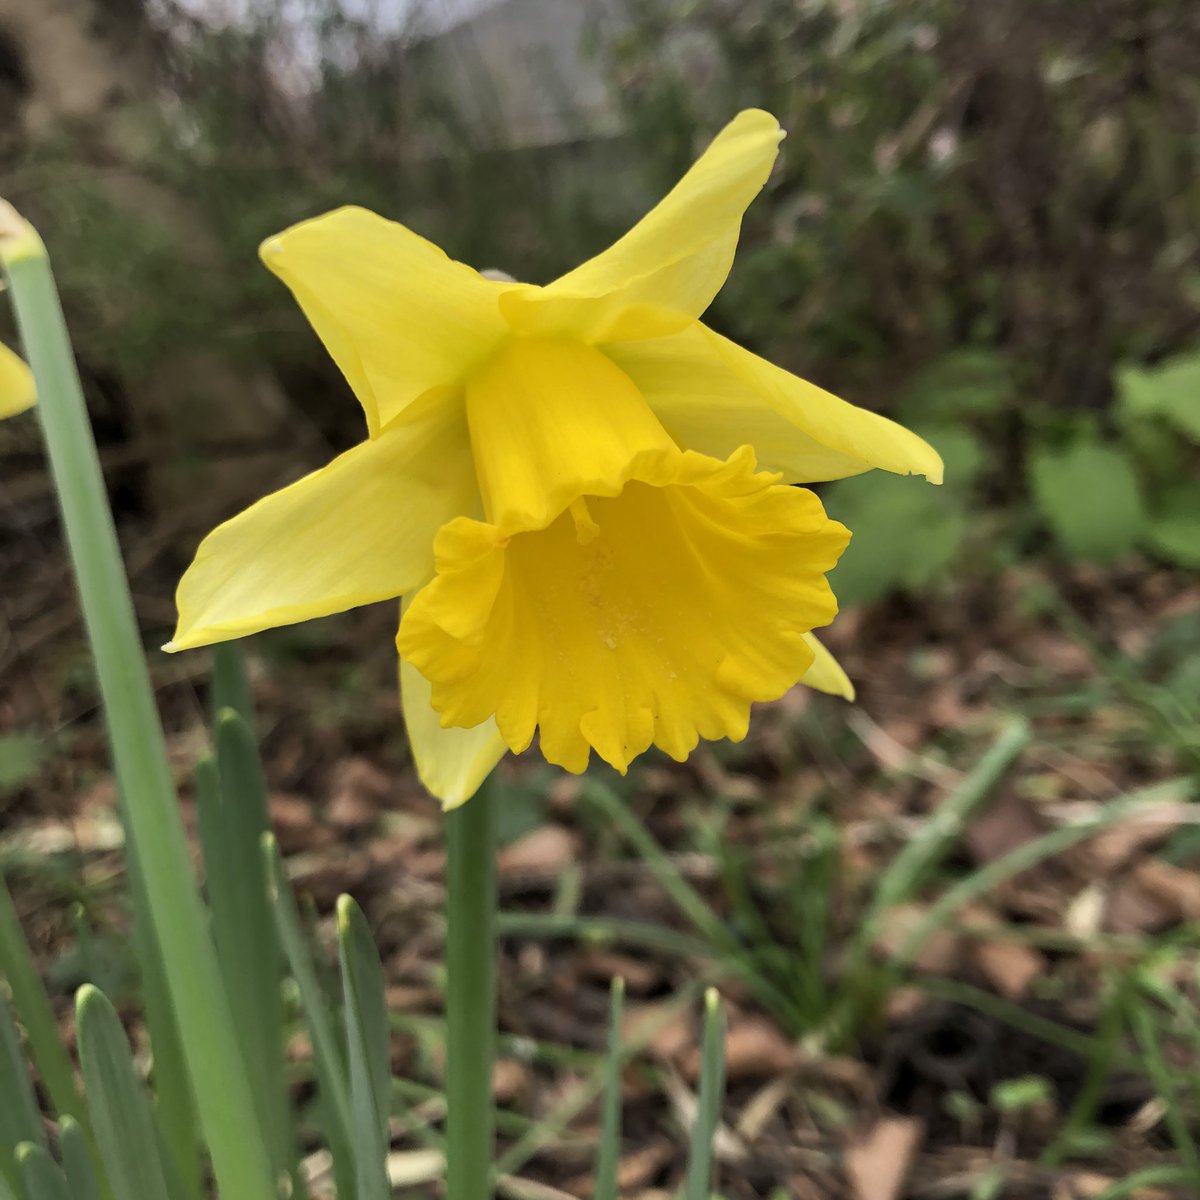 Daffodils are happening!